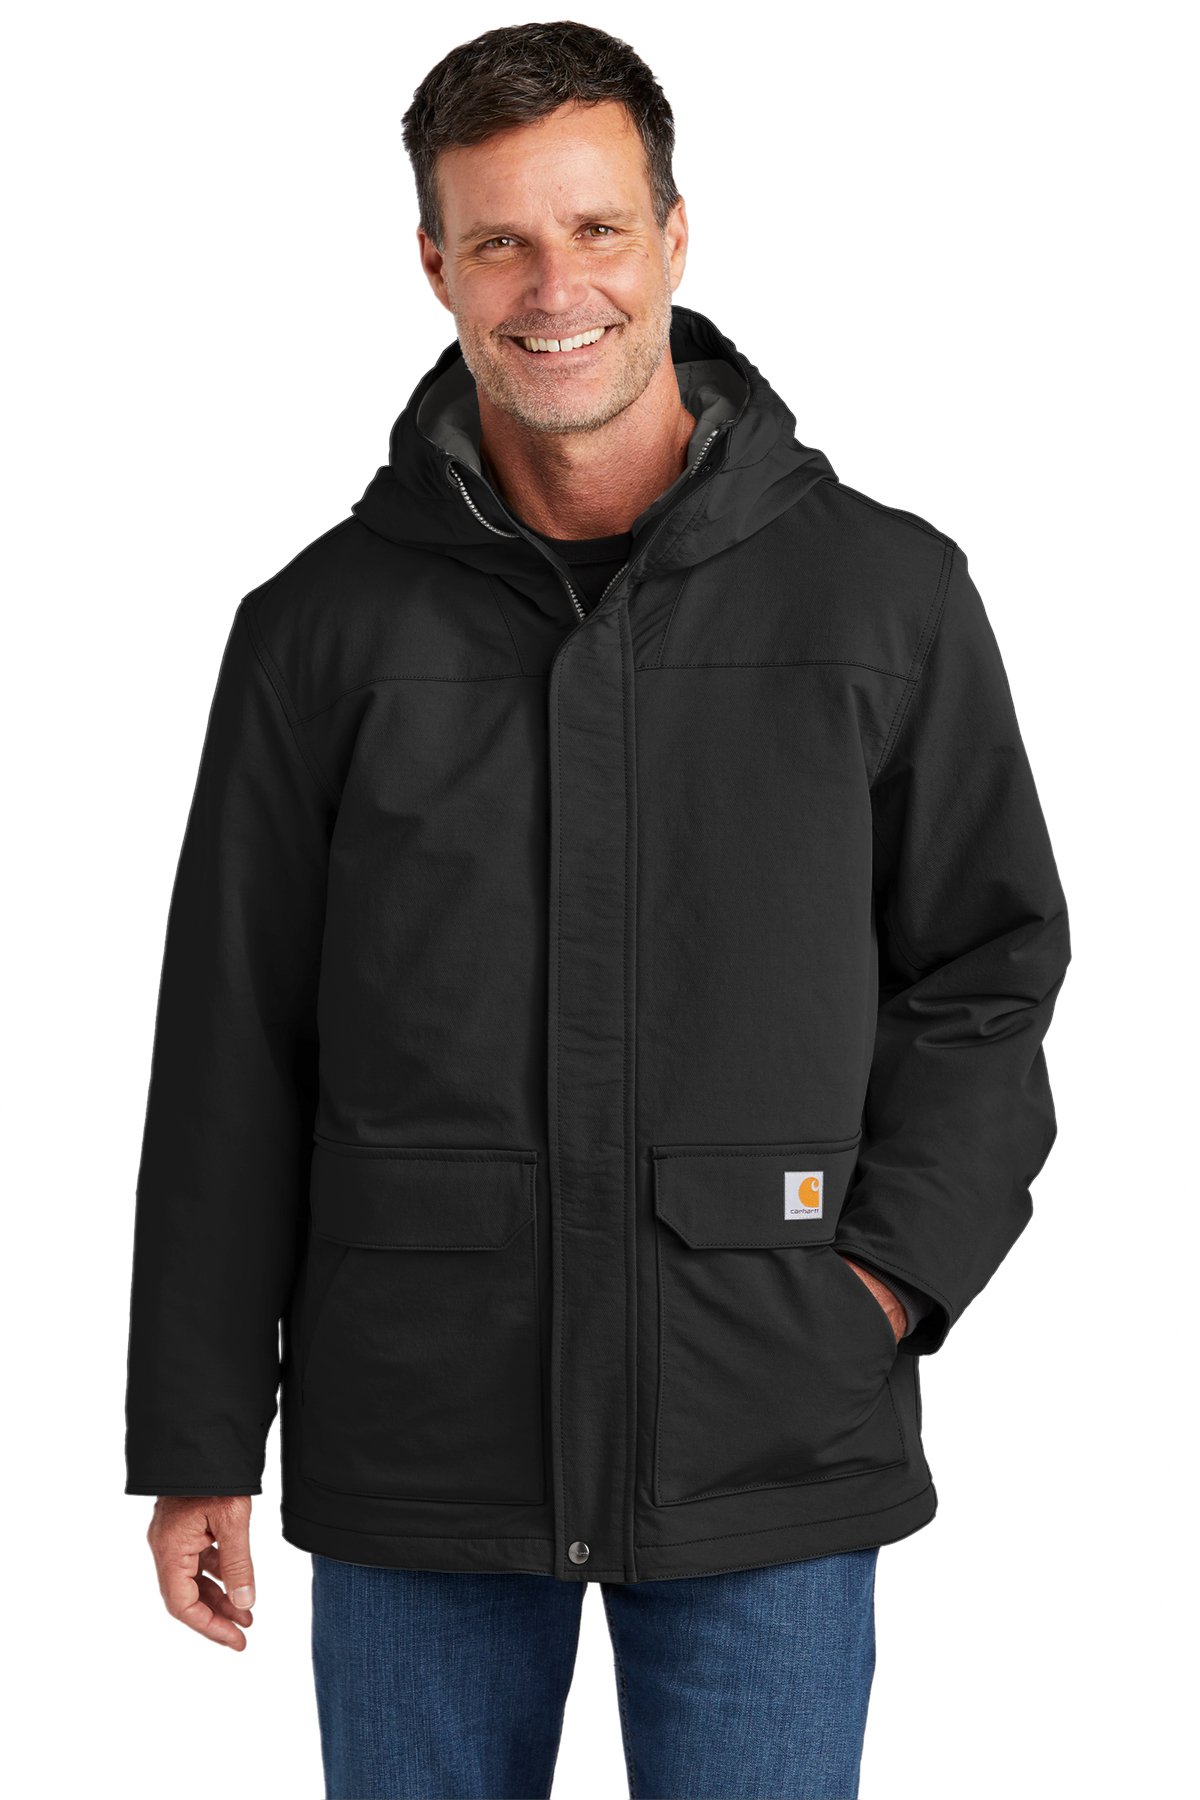 Carhartt Super Dux Insulated Hooded Coat | Product | SanMar